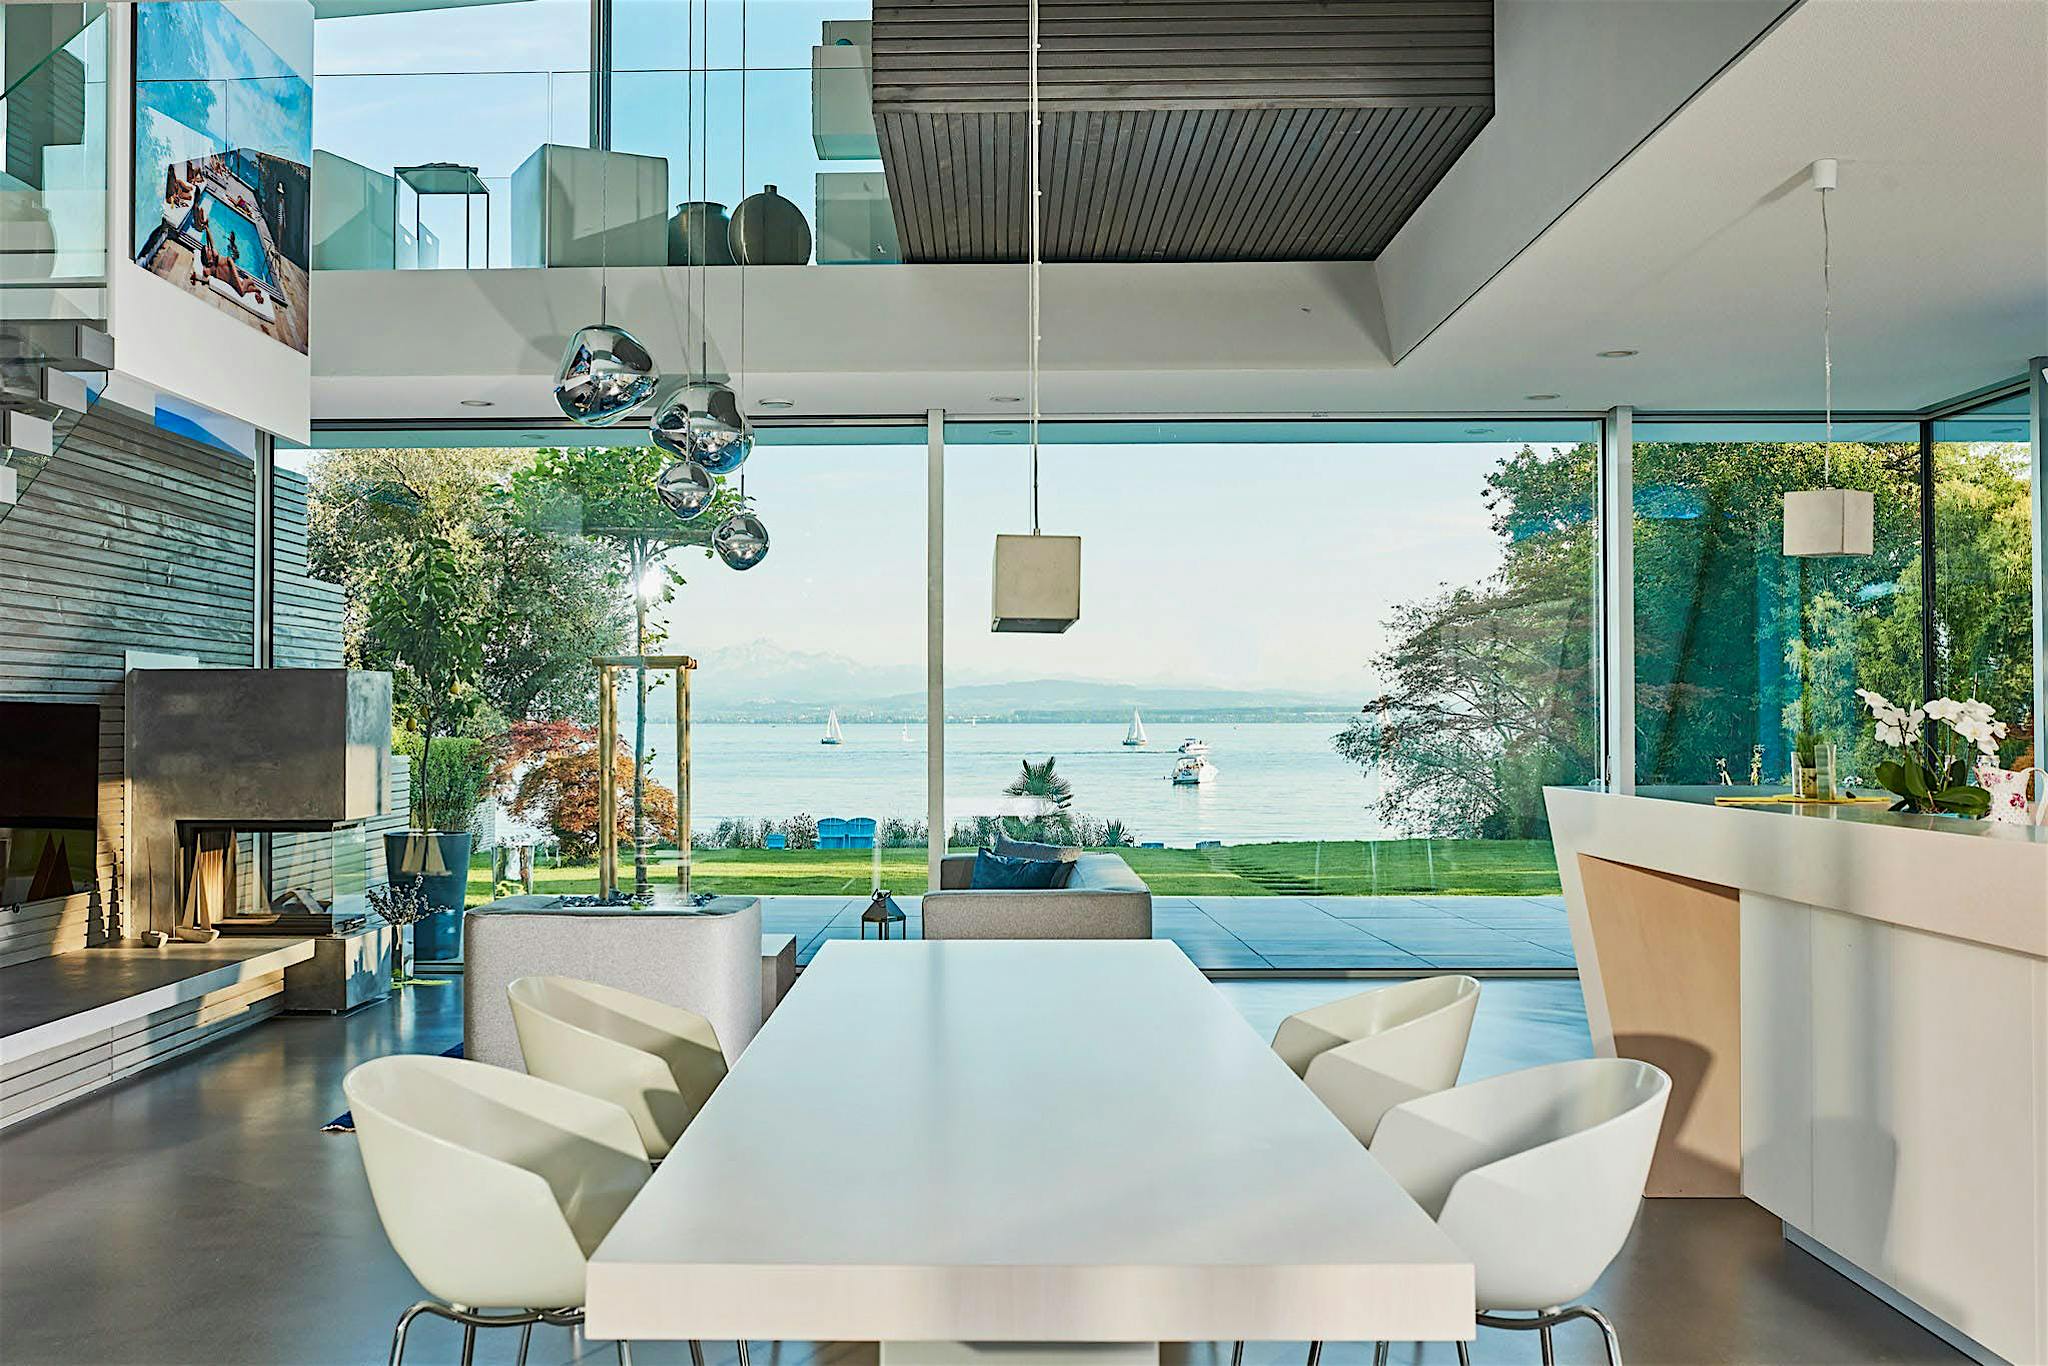 large panel residential glass walls with ocean view